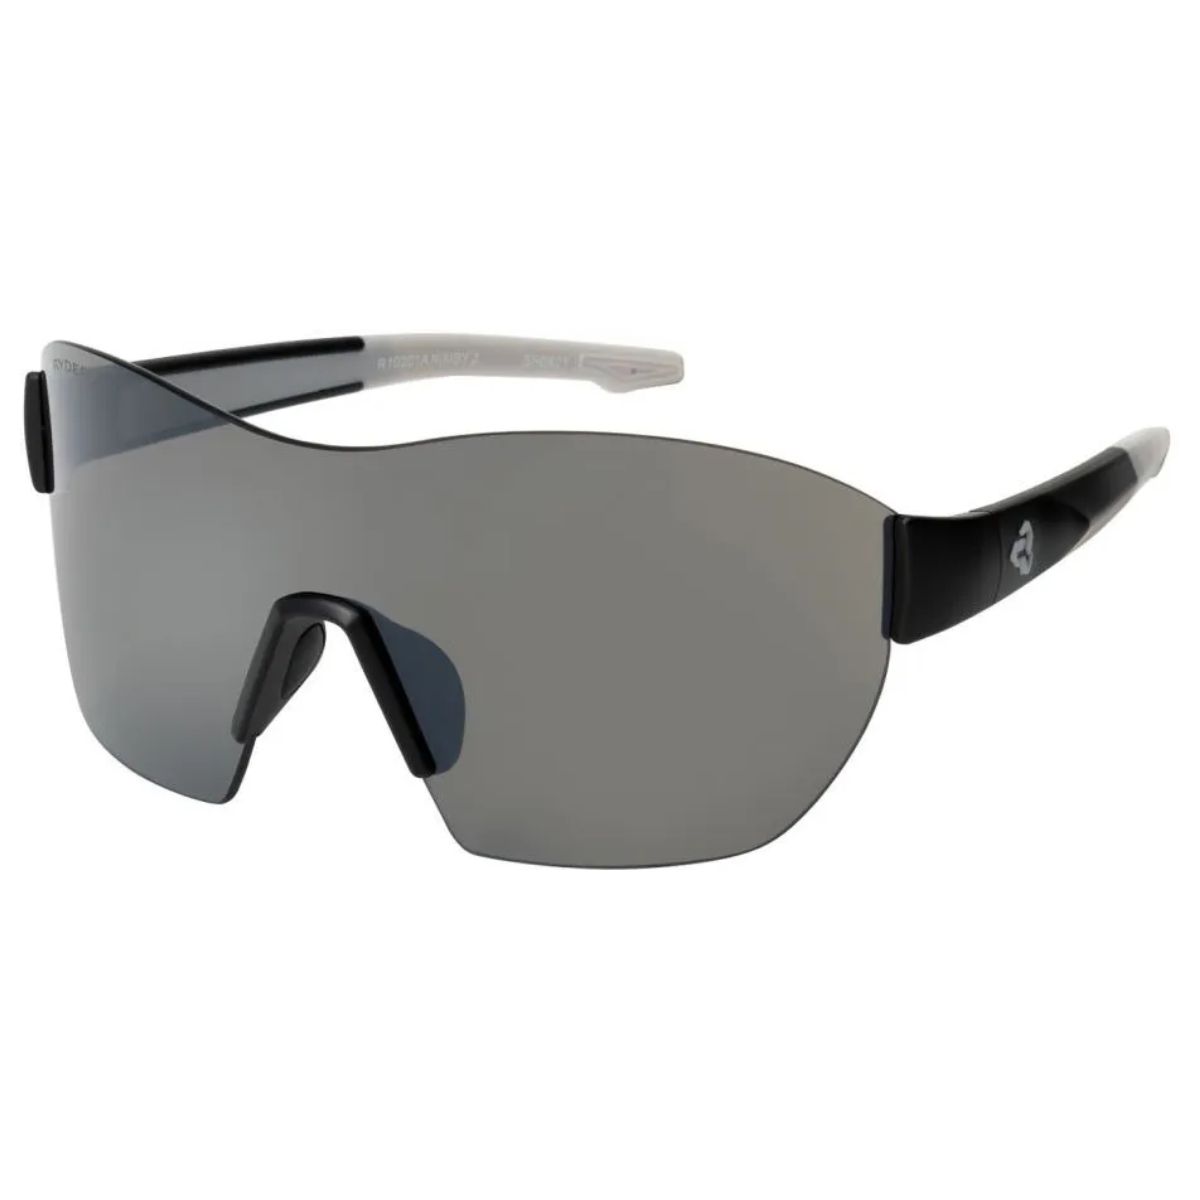 Ryders Nimby 2 Sunglasses In Matte Black With Gray - Green Lenses